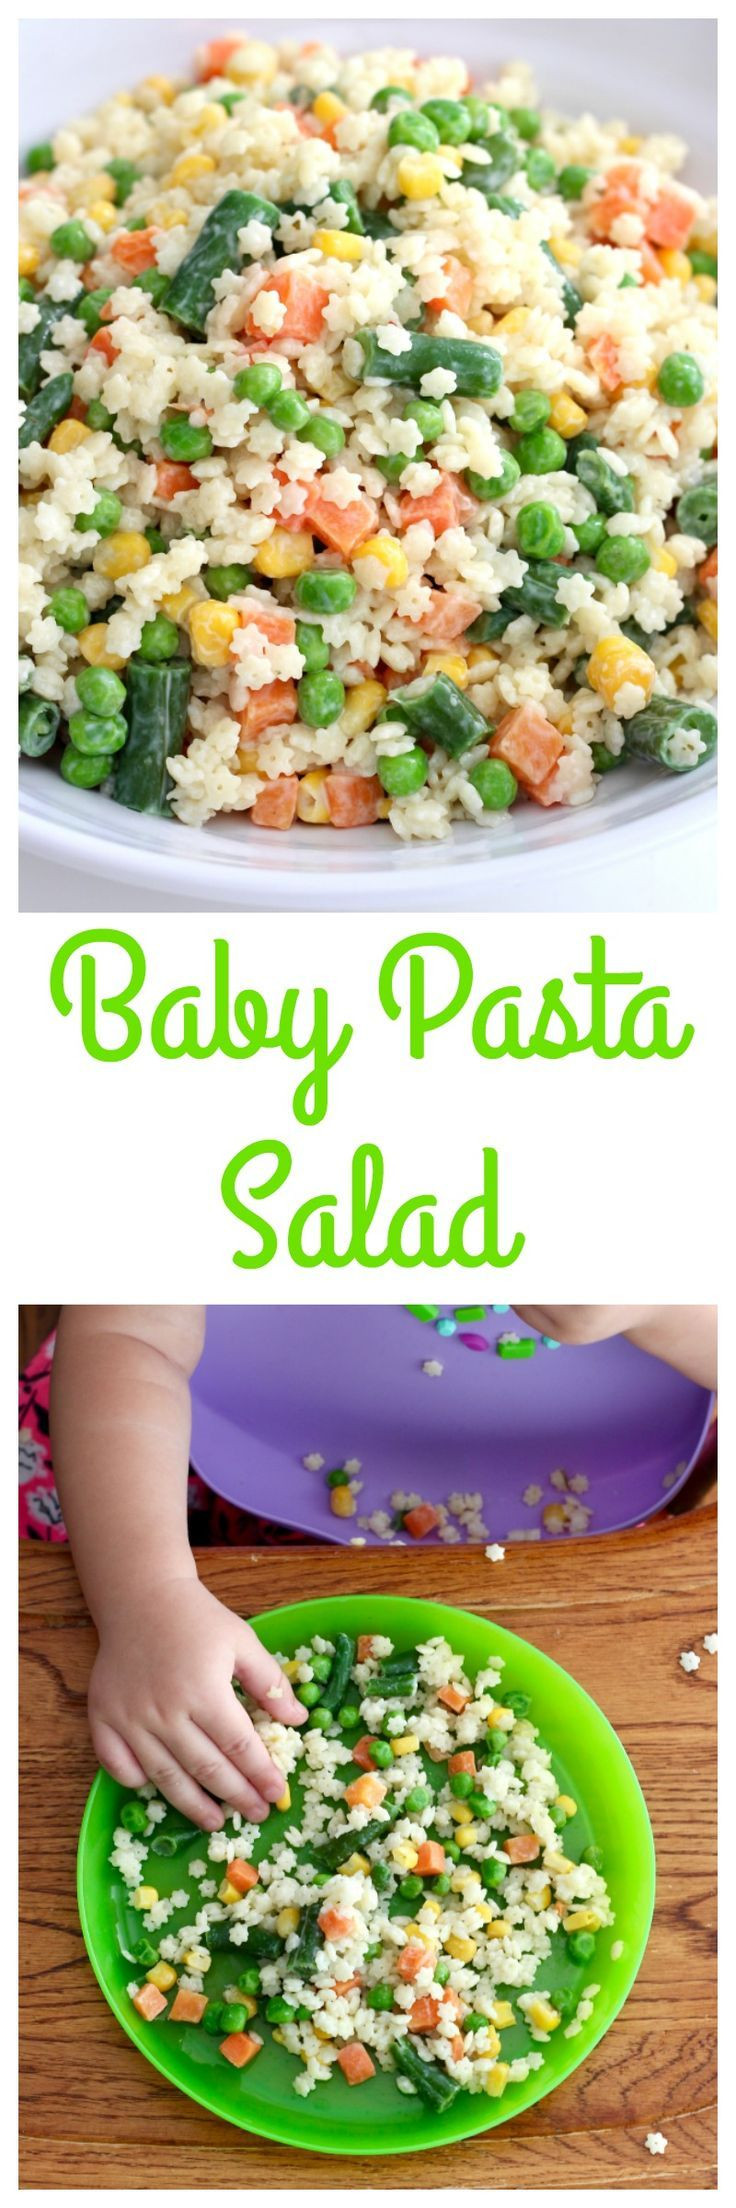 Pasta Recipes For Baby
 1397 best Homemade baby food recipes images on Pinterest